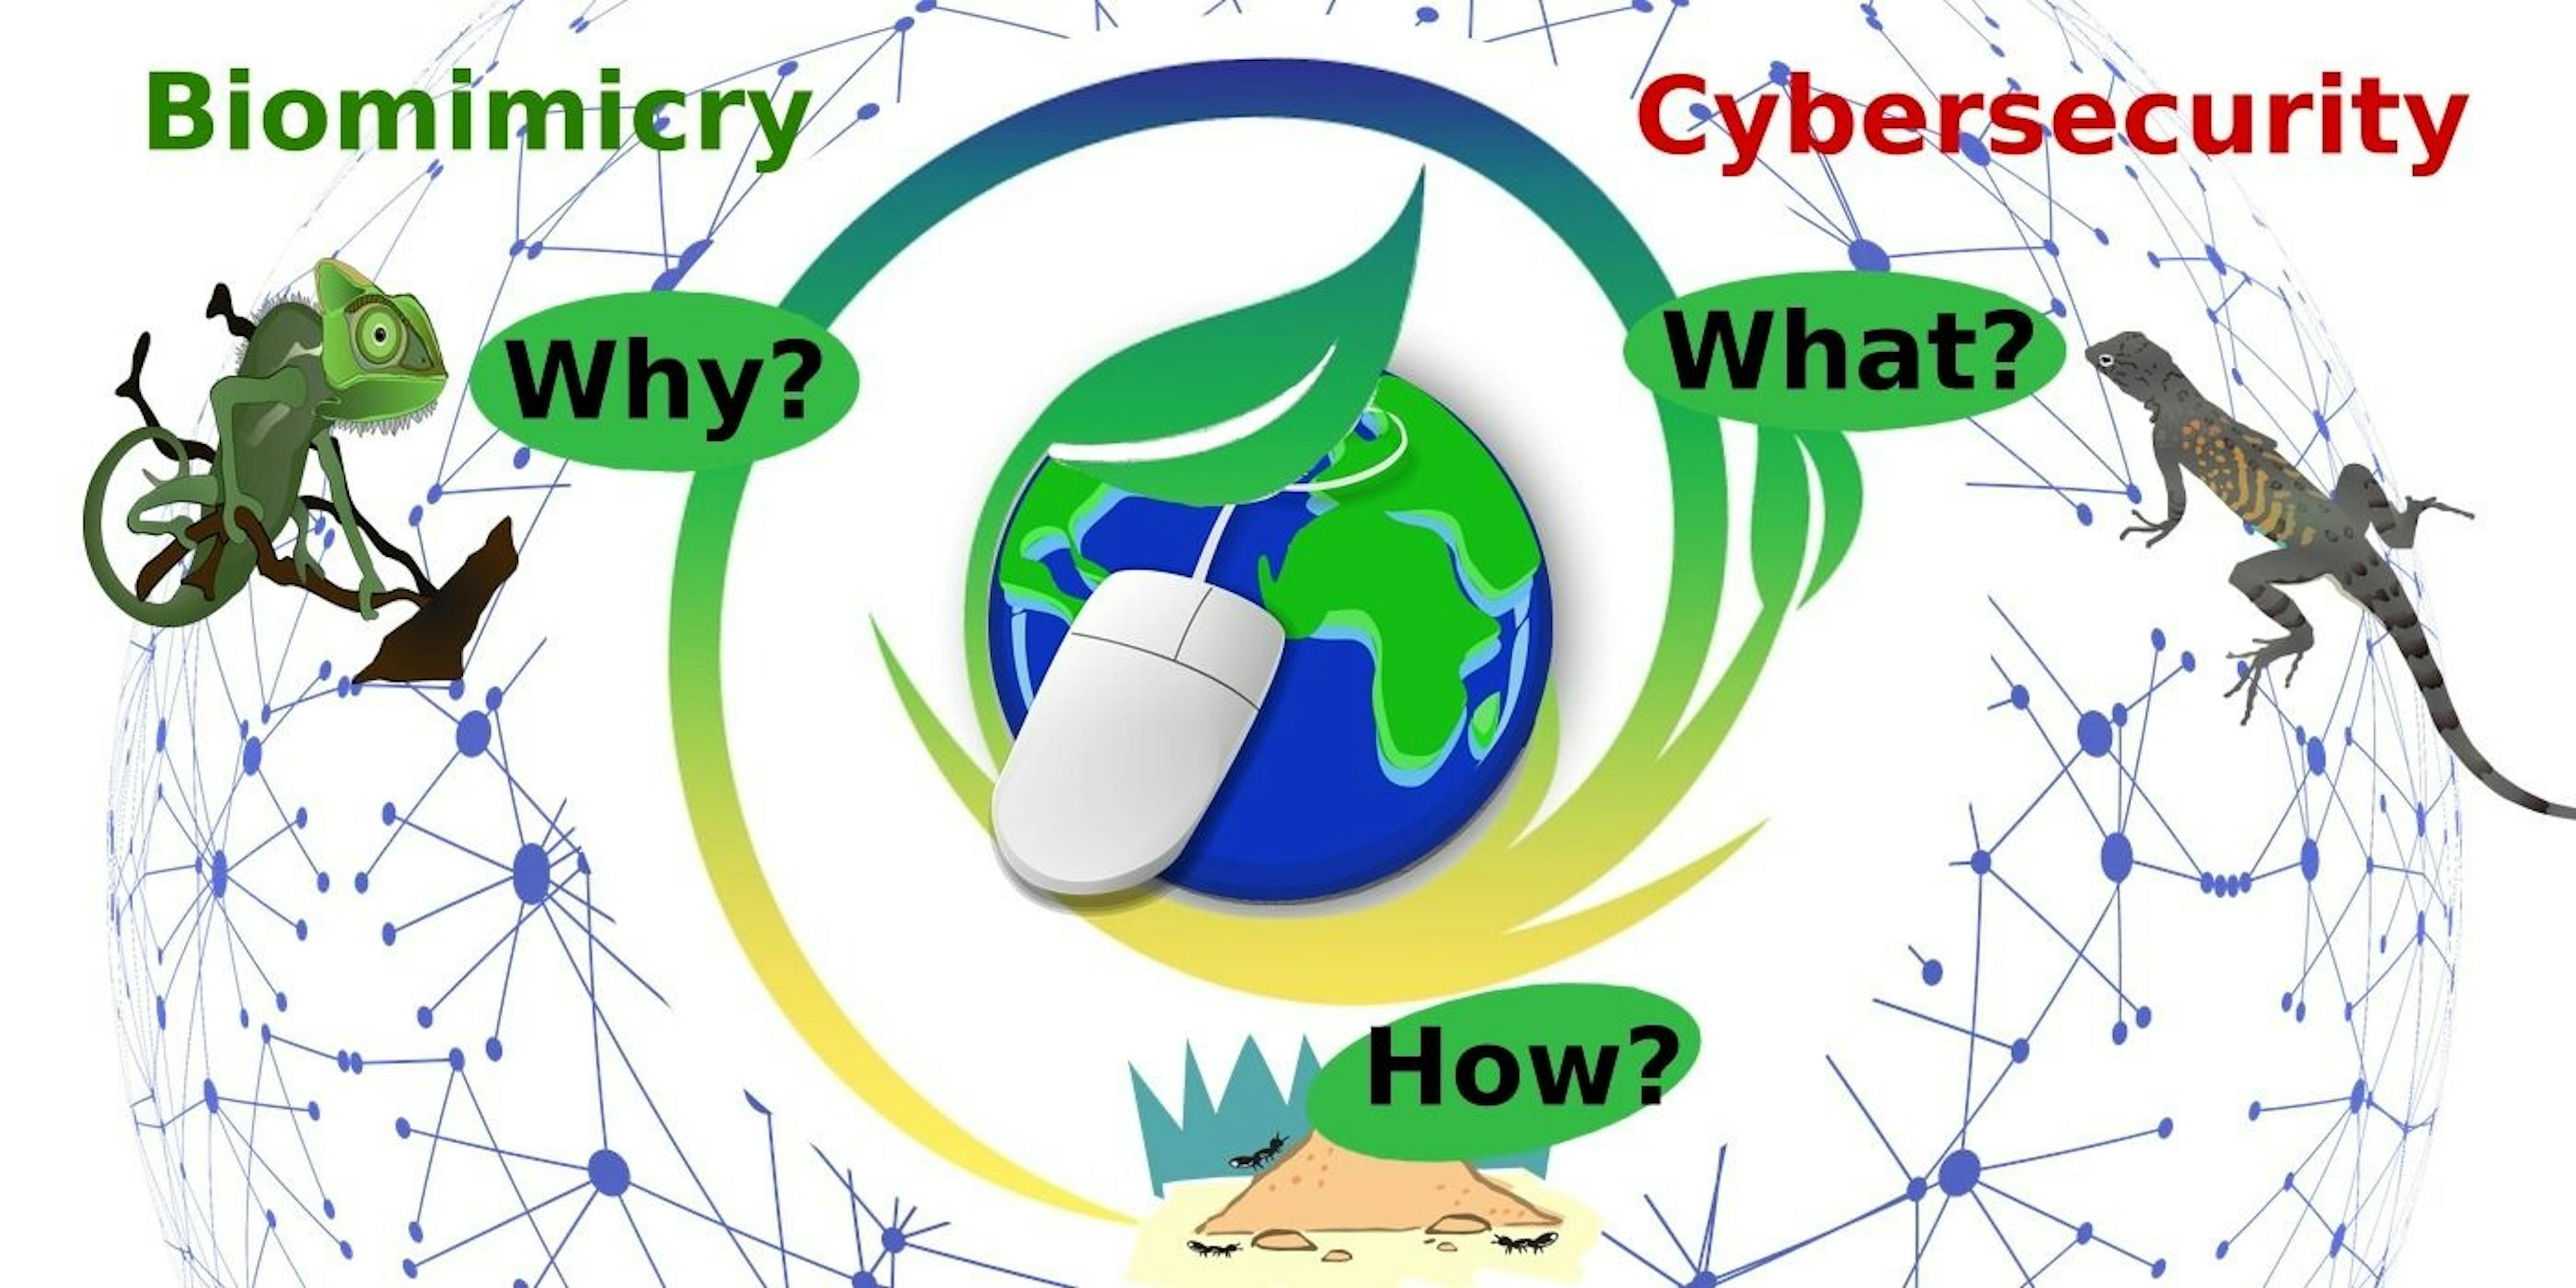 /cybersecurity-biomimicry-why-what-and-how-we-could-learn-from-nature feature image